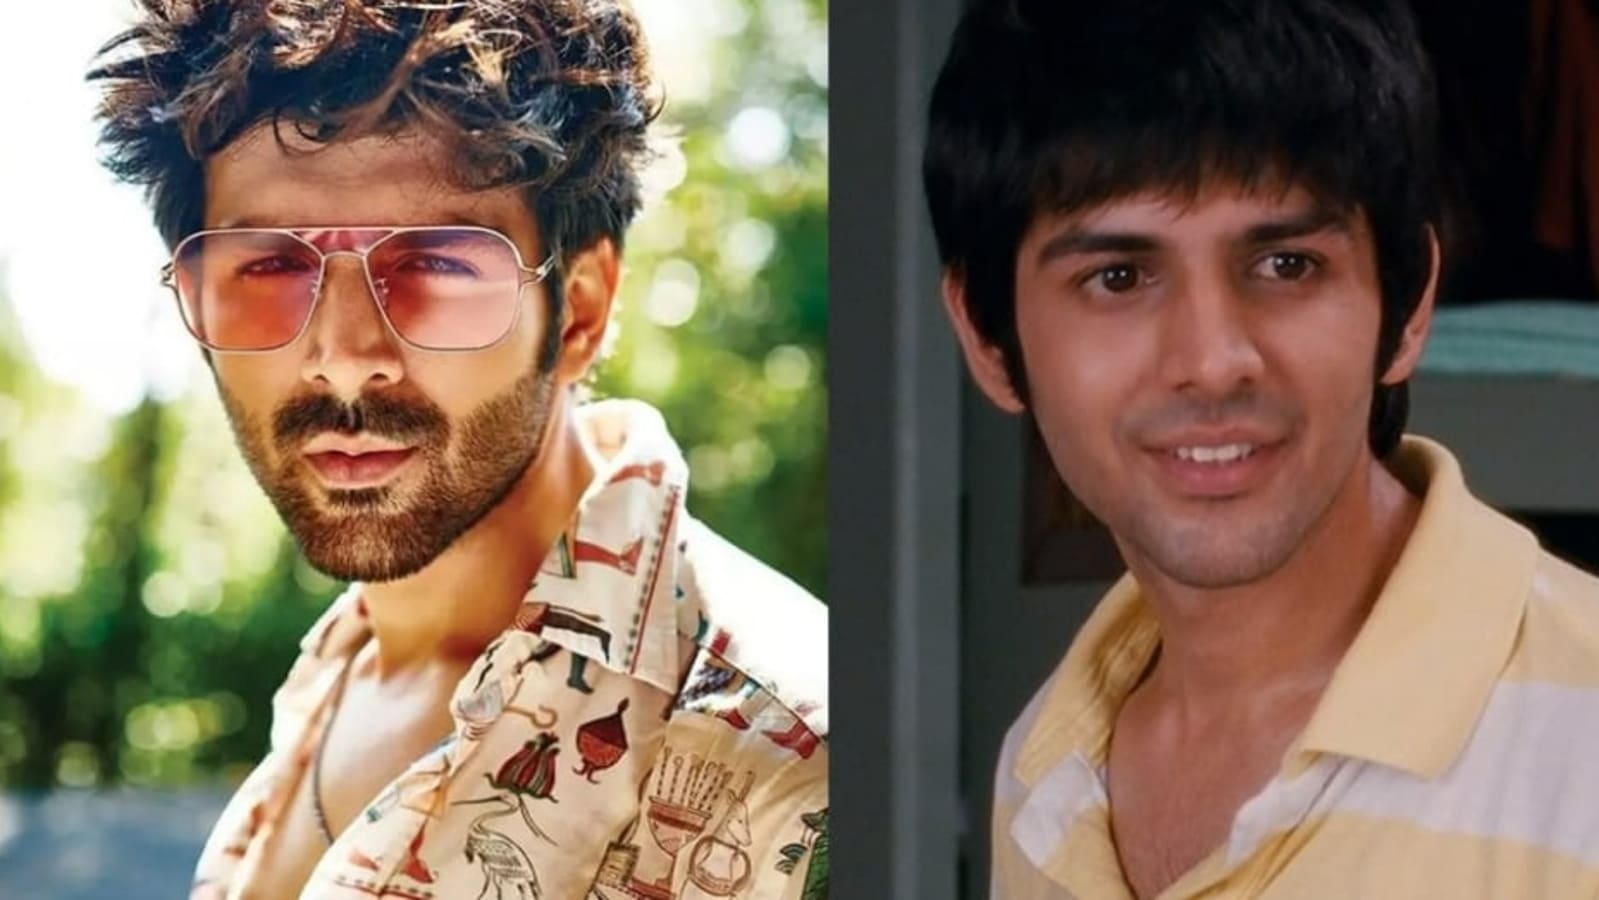 Kartik Aaryan says for years people didn’t know his name: ‘I was just the monologue guy from Pyaar Ka Punchnama’